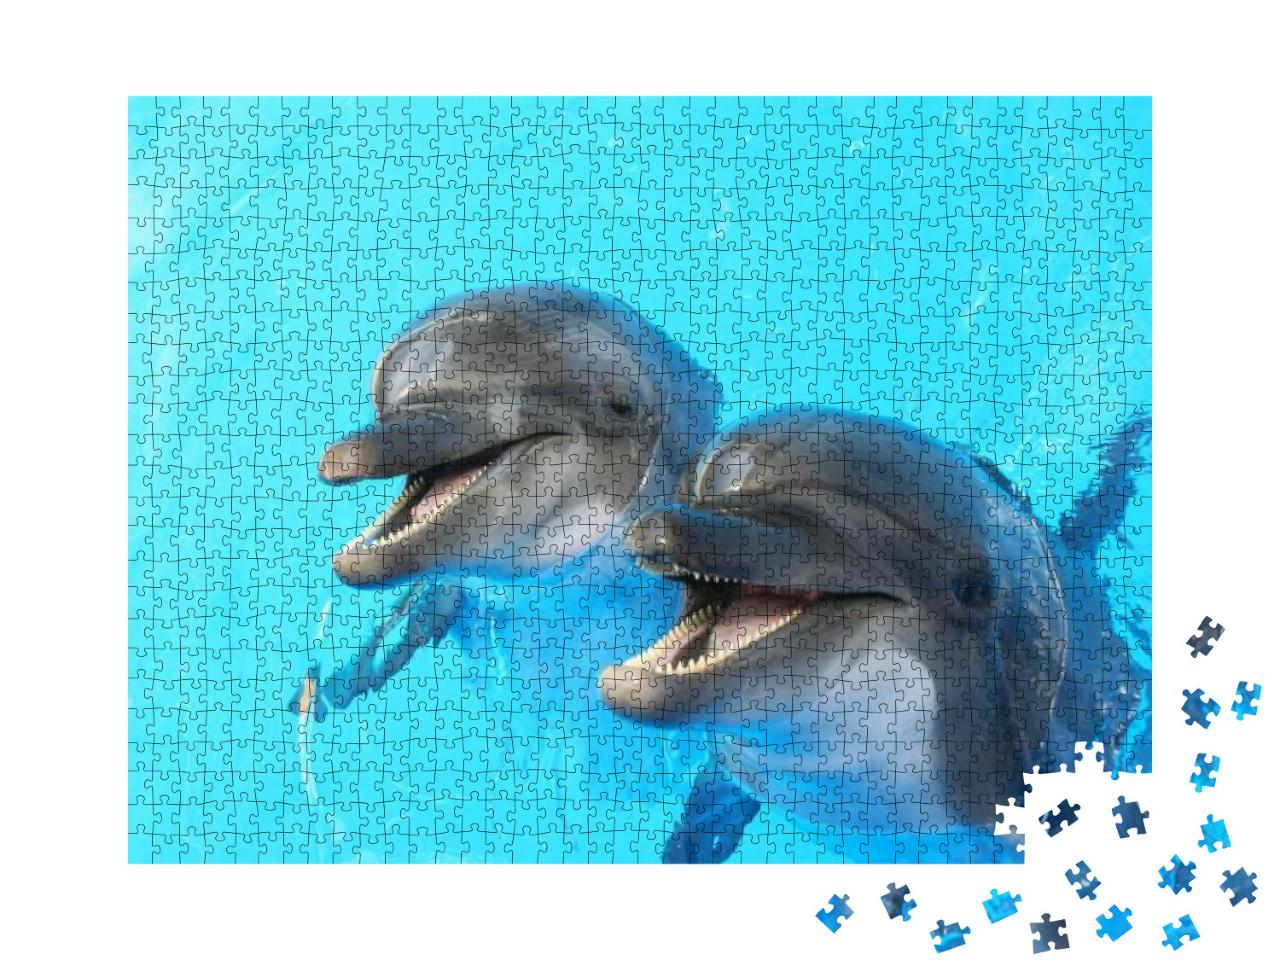 Two Dolphins Swim in the Pool... Jigsaw Puzzle with 1000 pieces